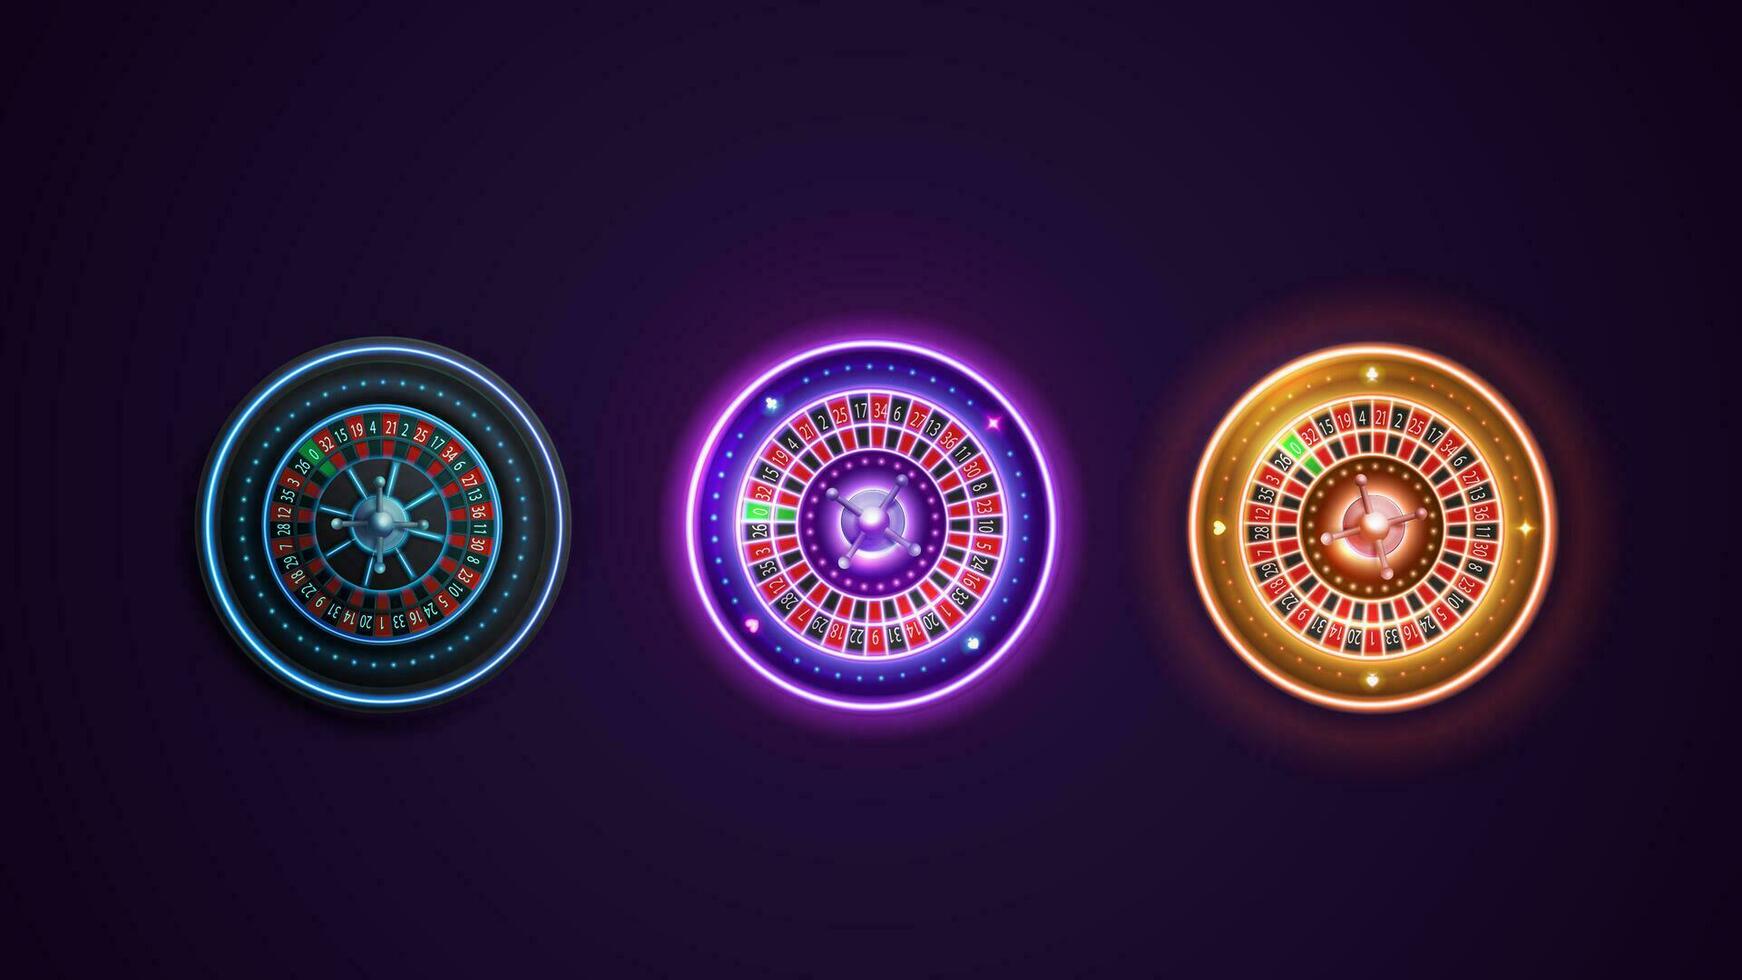 Neon Casino Roulette wheels isolated on dark background, blue, pink and gold digital casino elements vector